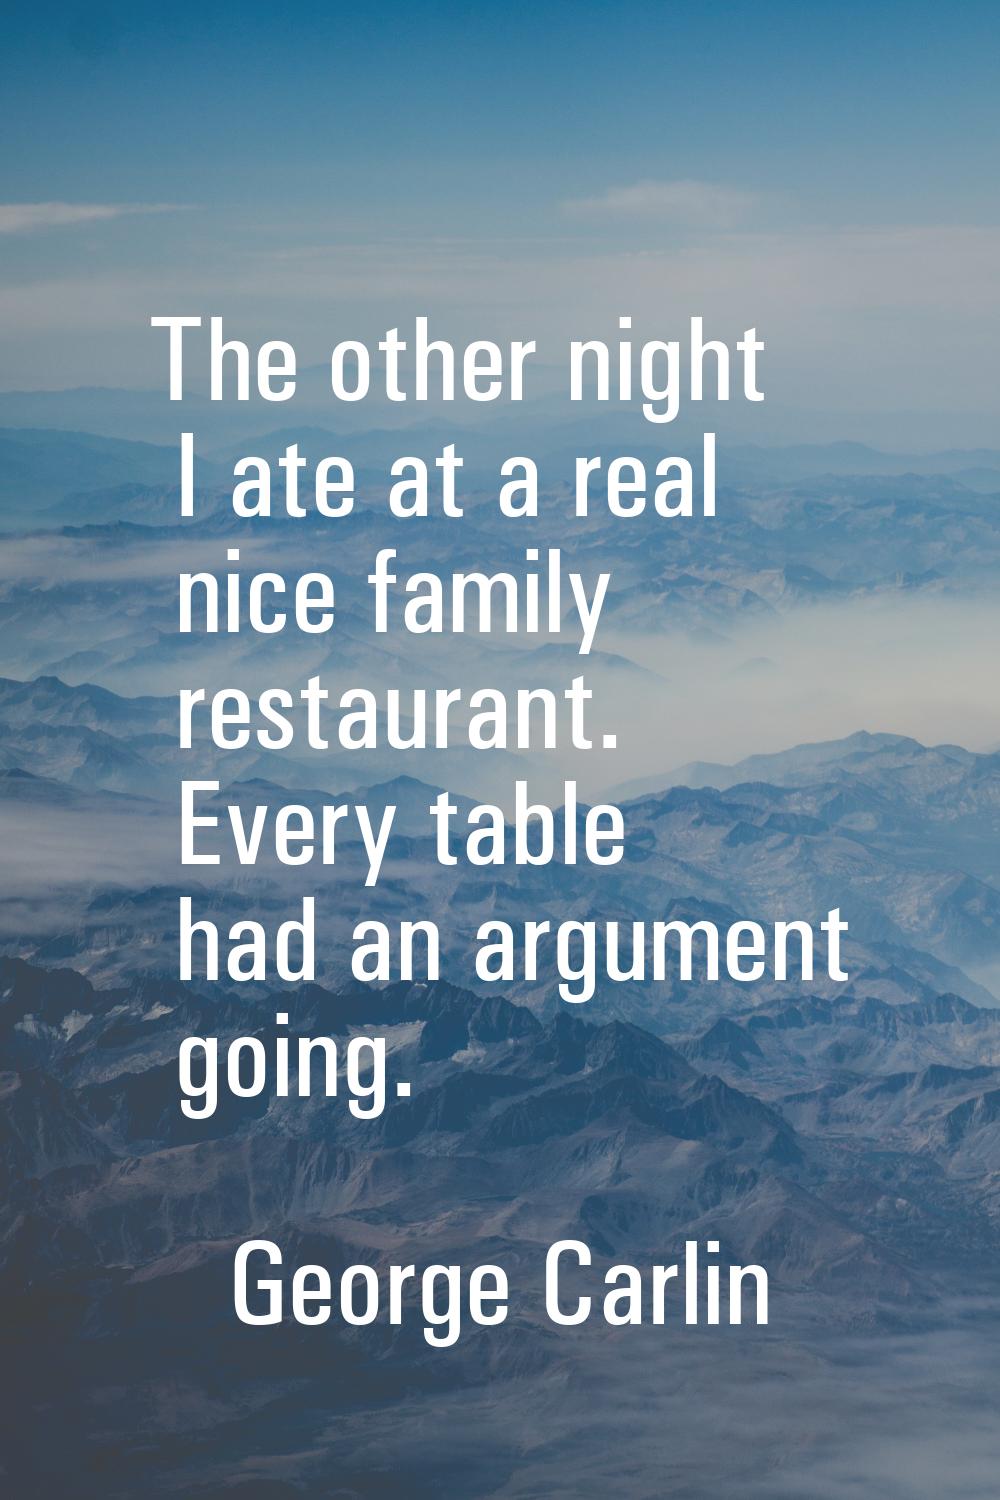 The other night I ate at a real nice family restaurant. Every table had an argument going.